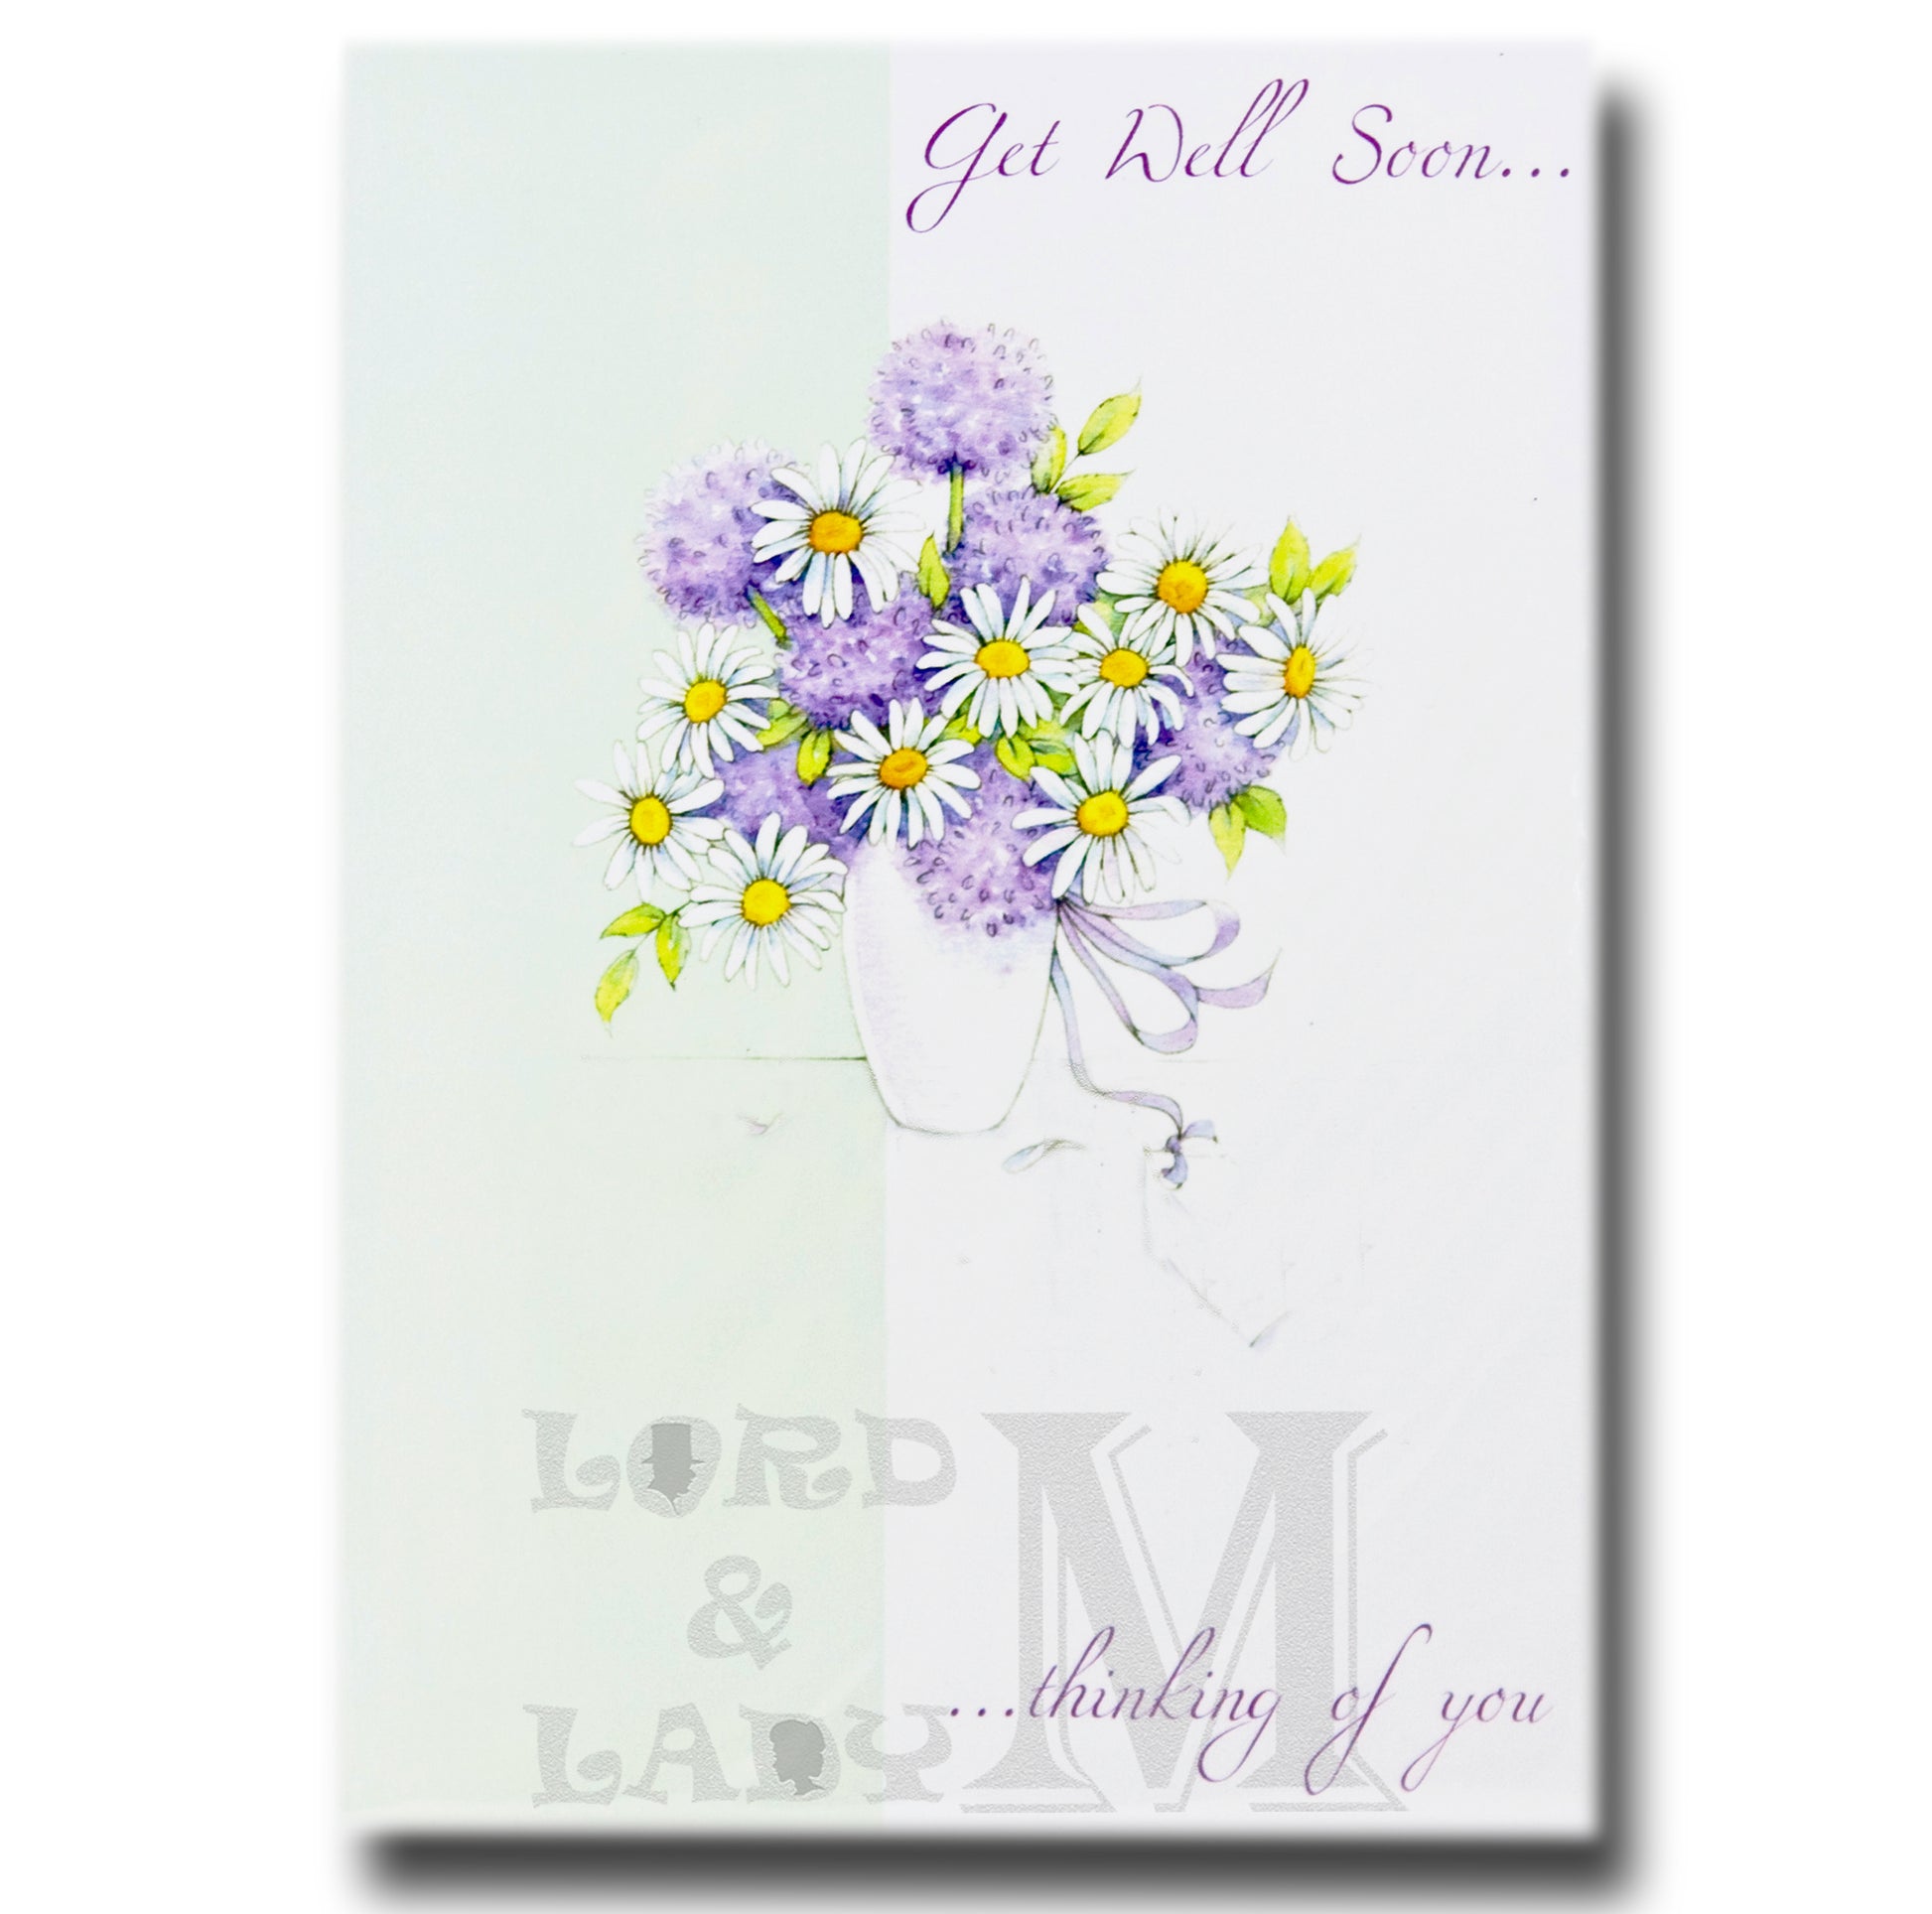 17cm - Get Well Soon Thinking Of You - Flowers